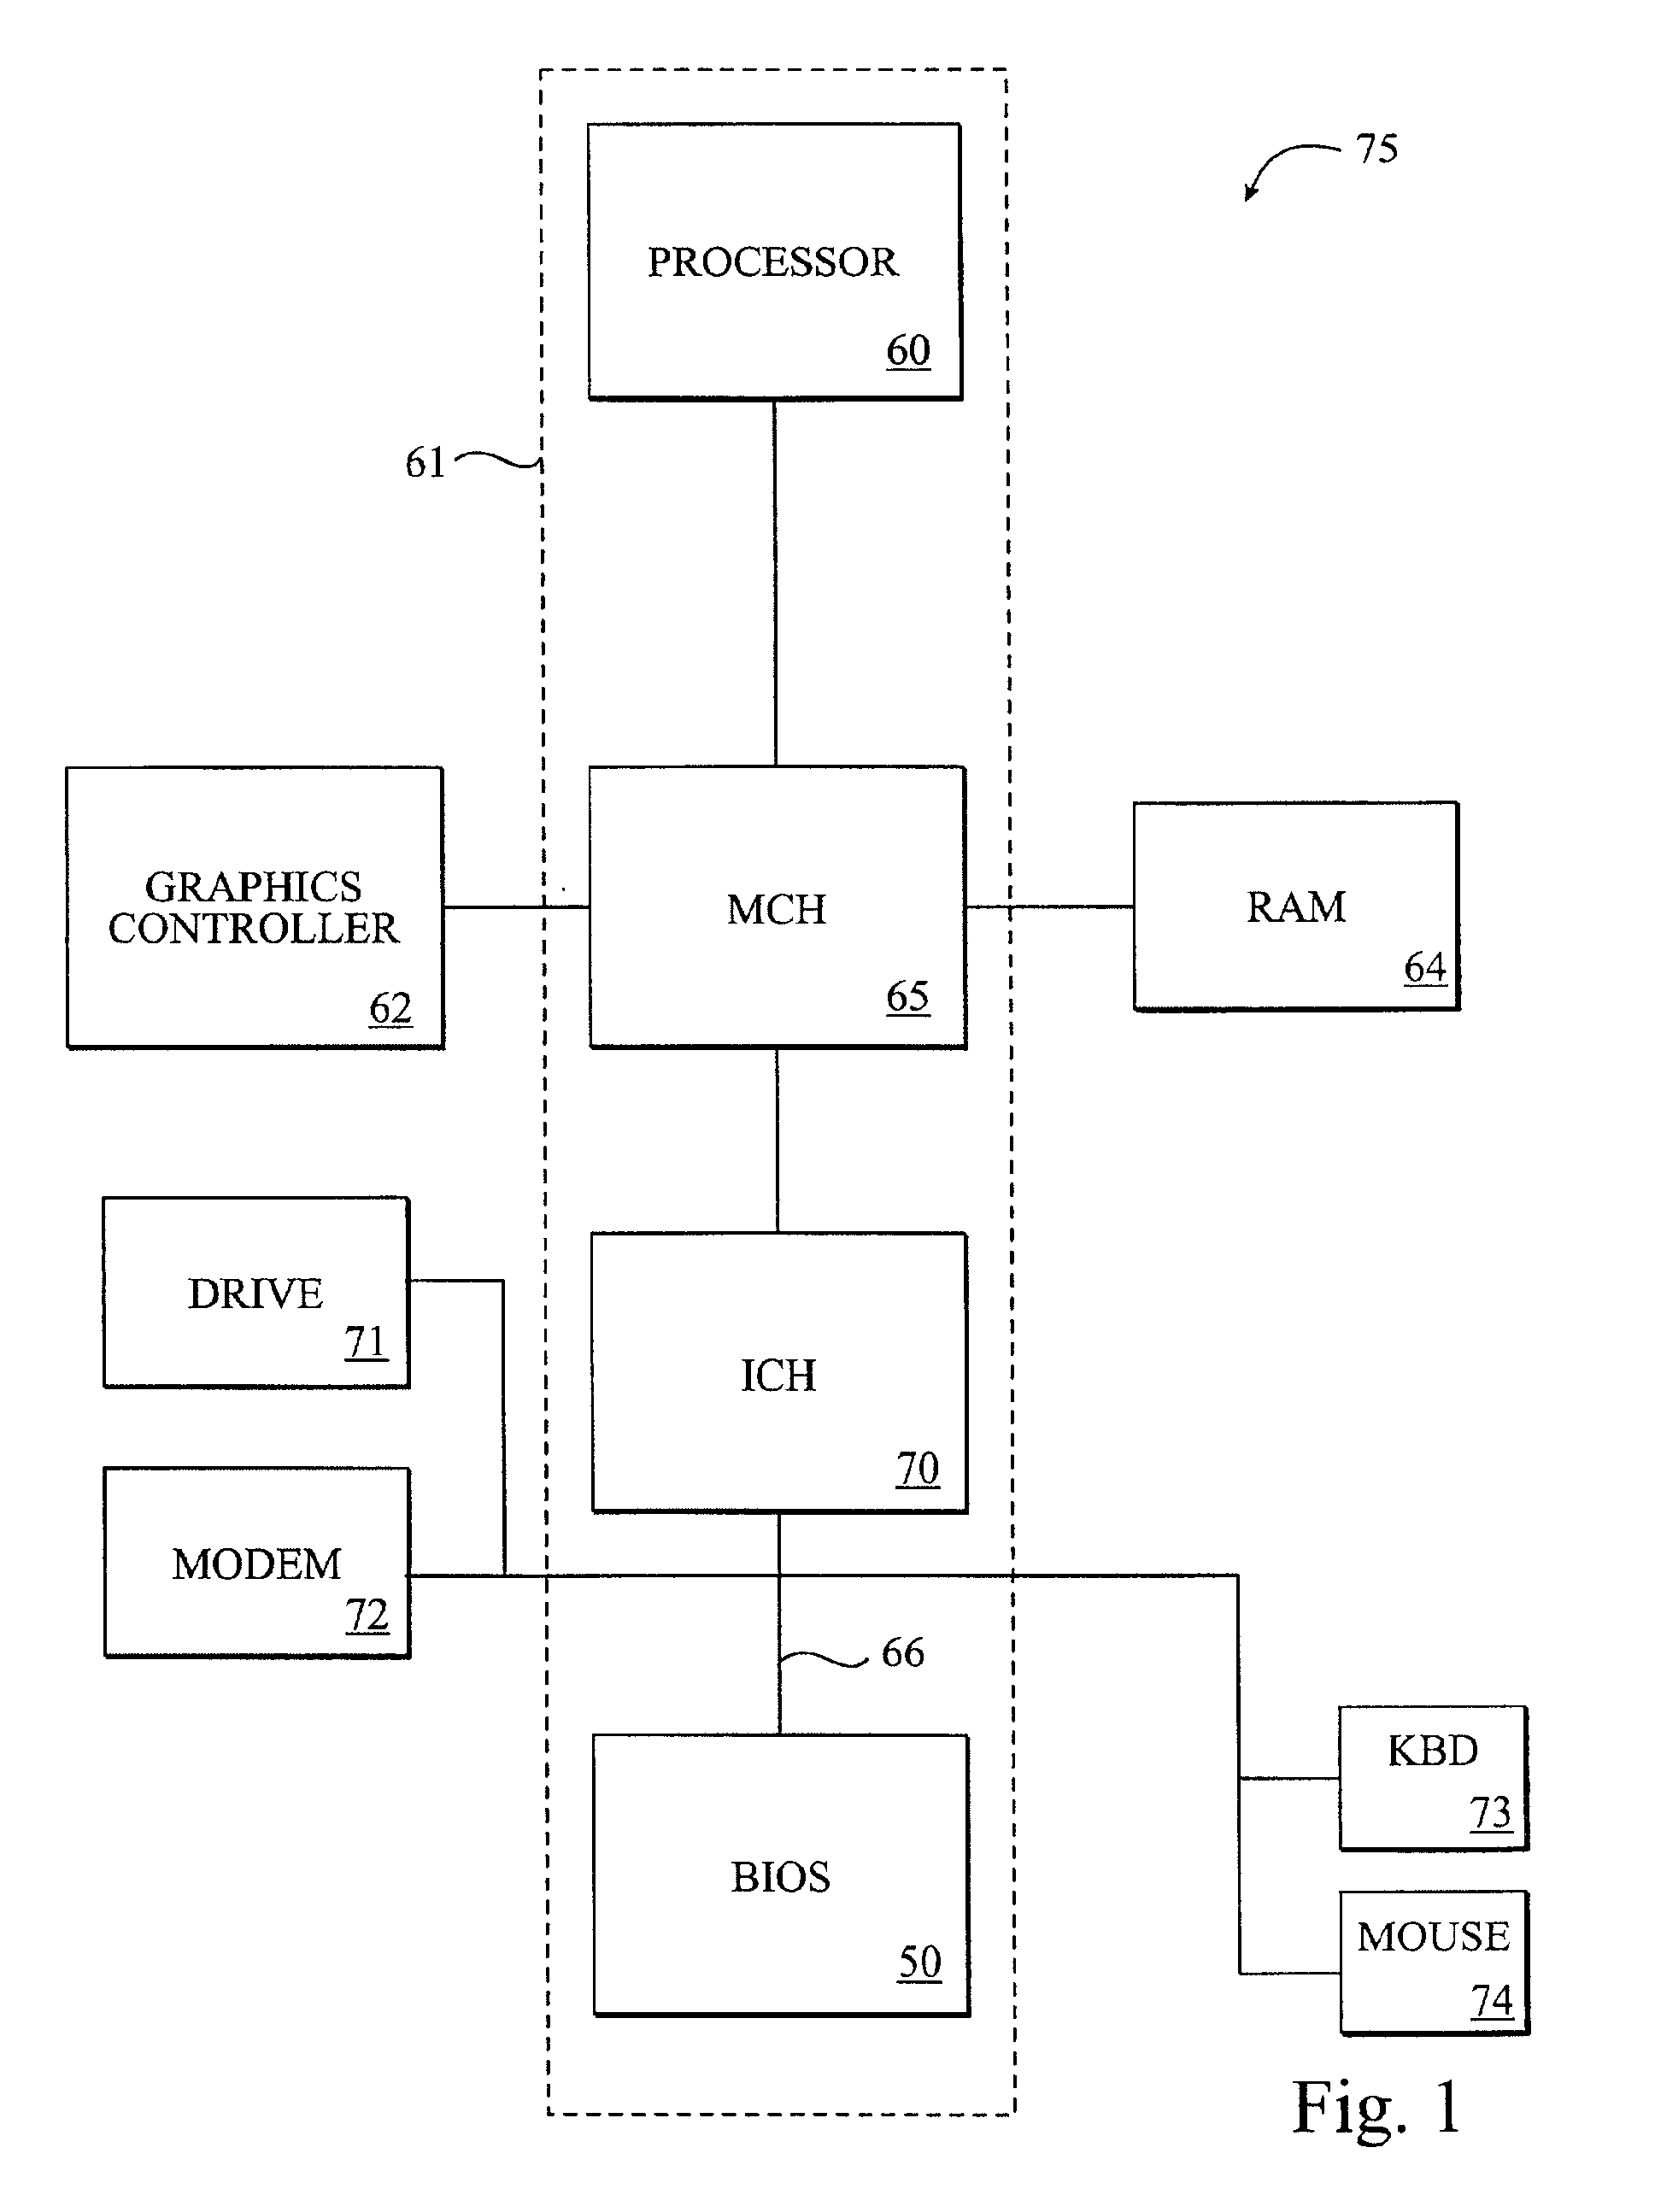 Multiple user interfaces for an integrated flash device